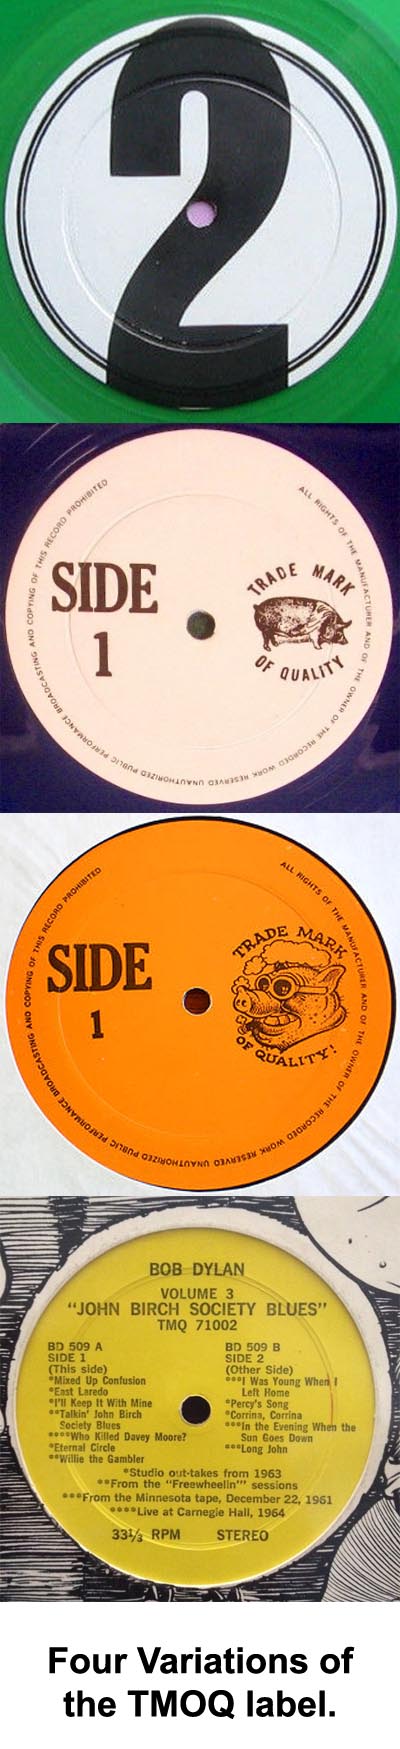 Various labels used by Trademark of Quality